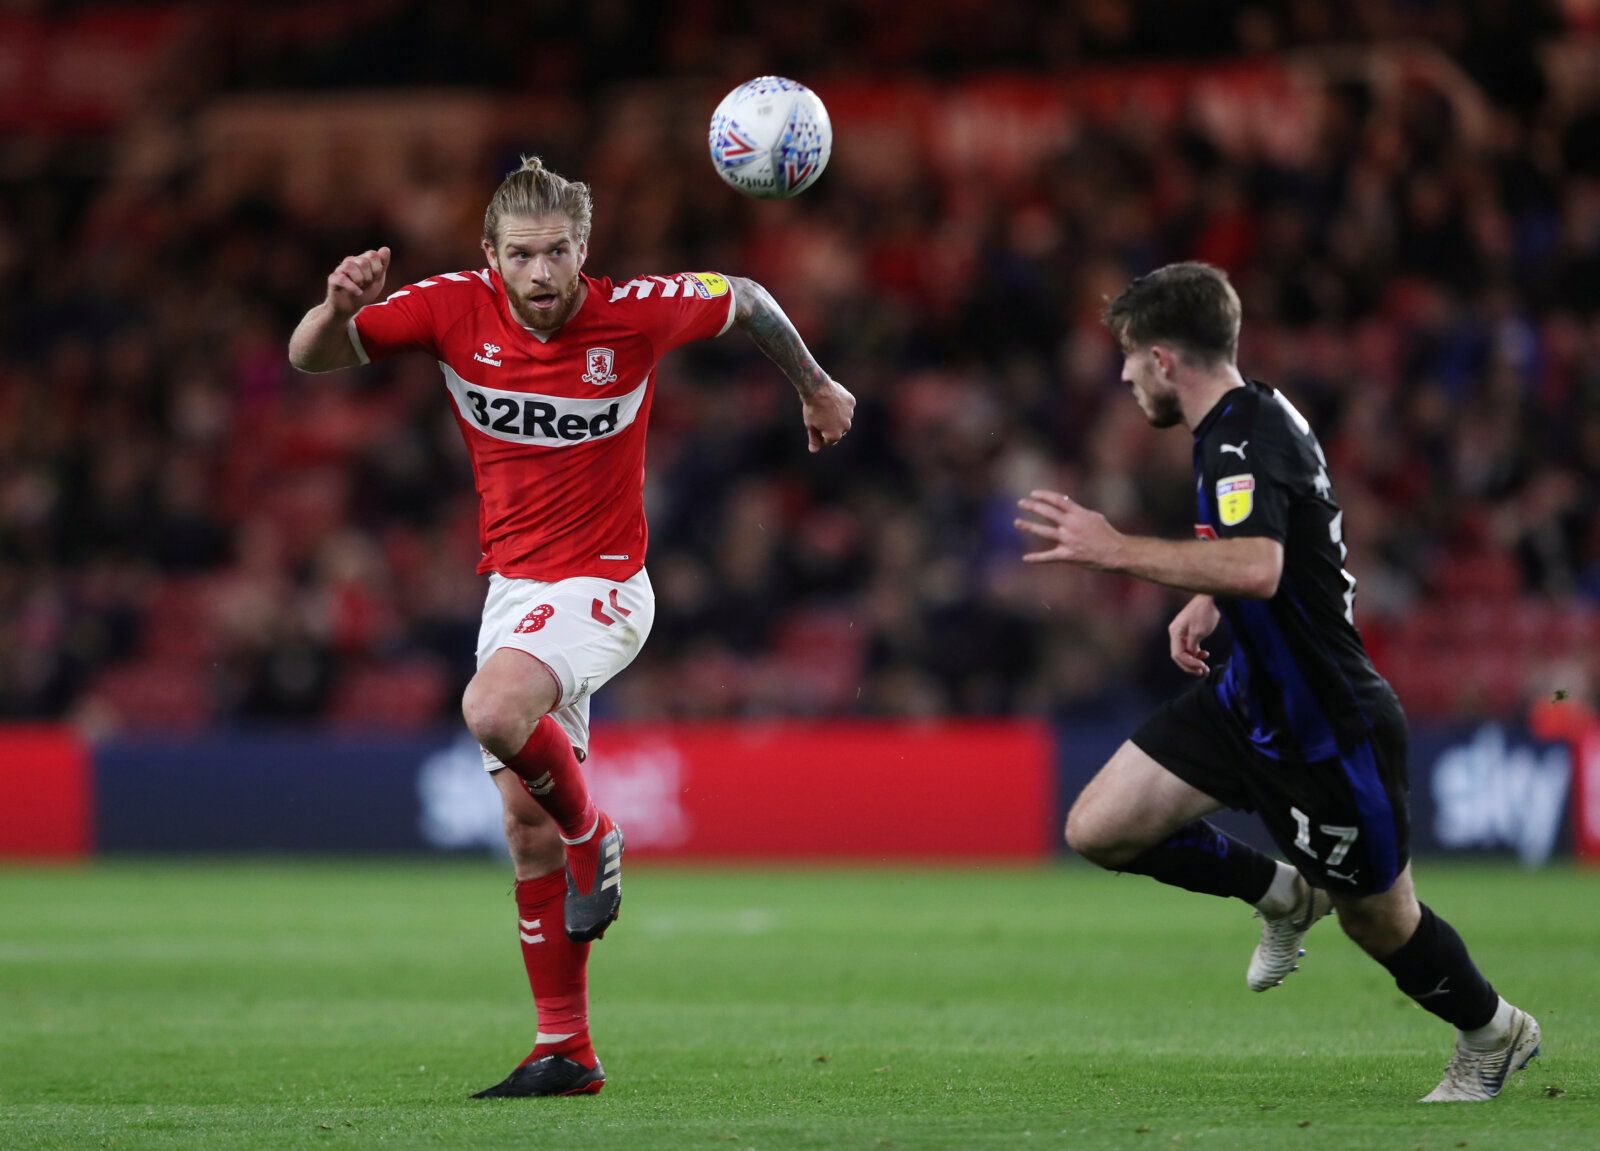 Soccer Football - Championship - Middlesbrough v Rotherham United - Riverside Stadium, MIddlesbrough, Britain - October 23, 2018   Middlesbrough's Adam Clayton in action with Rotherham's Ryan Manning   Action Images/Lee Smith    EDITORIAL USE ONLY. No use with unauthorized audio, video, data, fixture lists, club/league logos or 